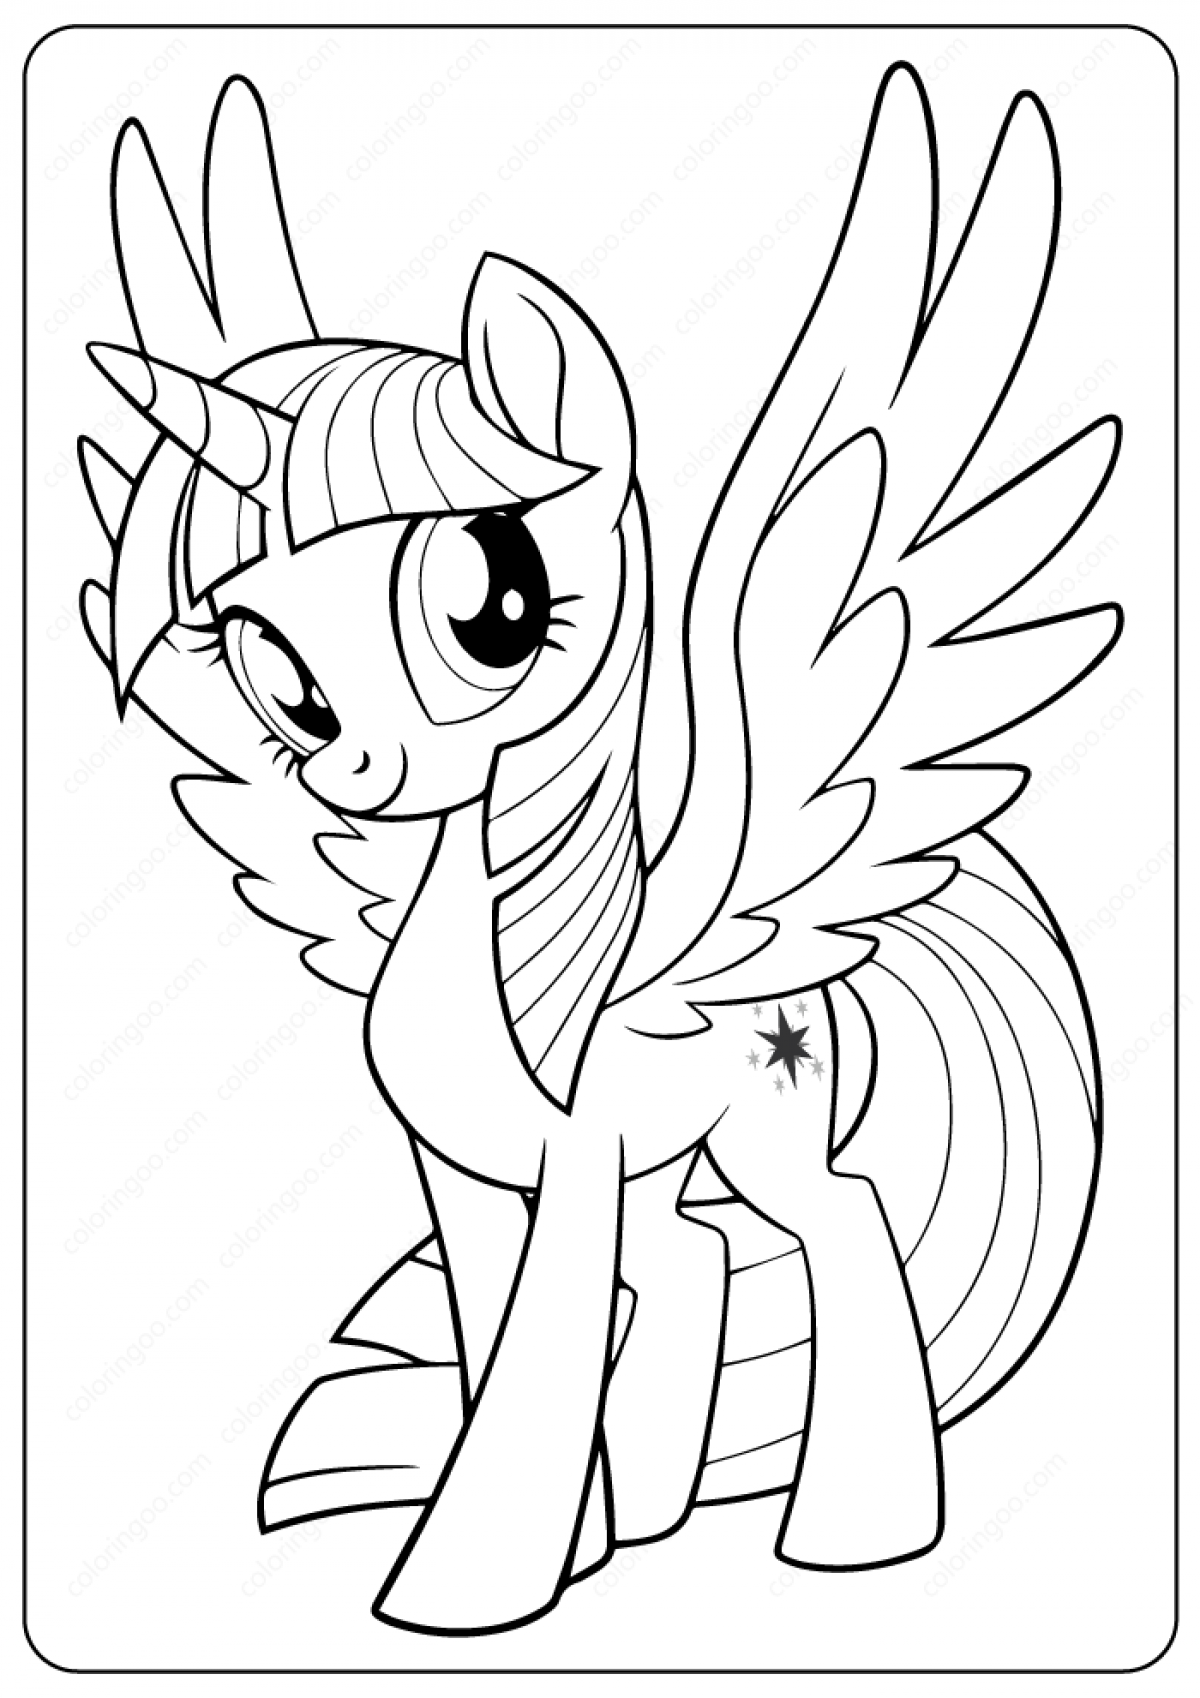 Printable My Little Pony Twilight Sparkle Coloring Pages ...